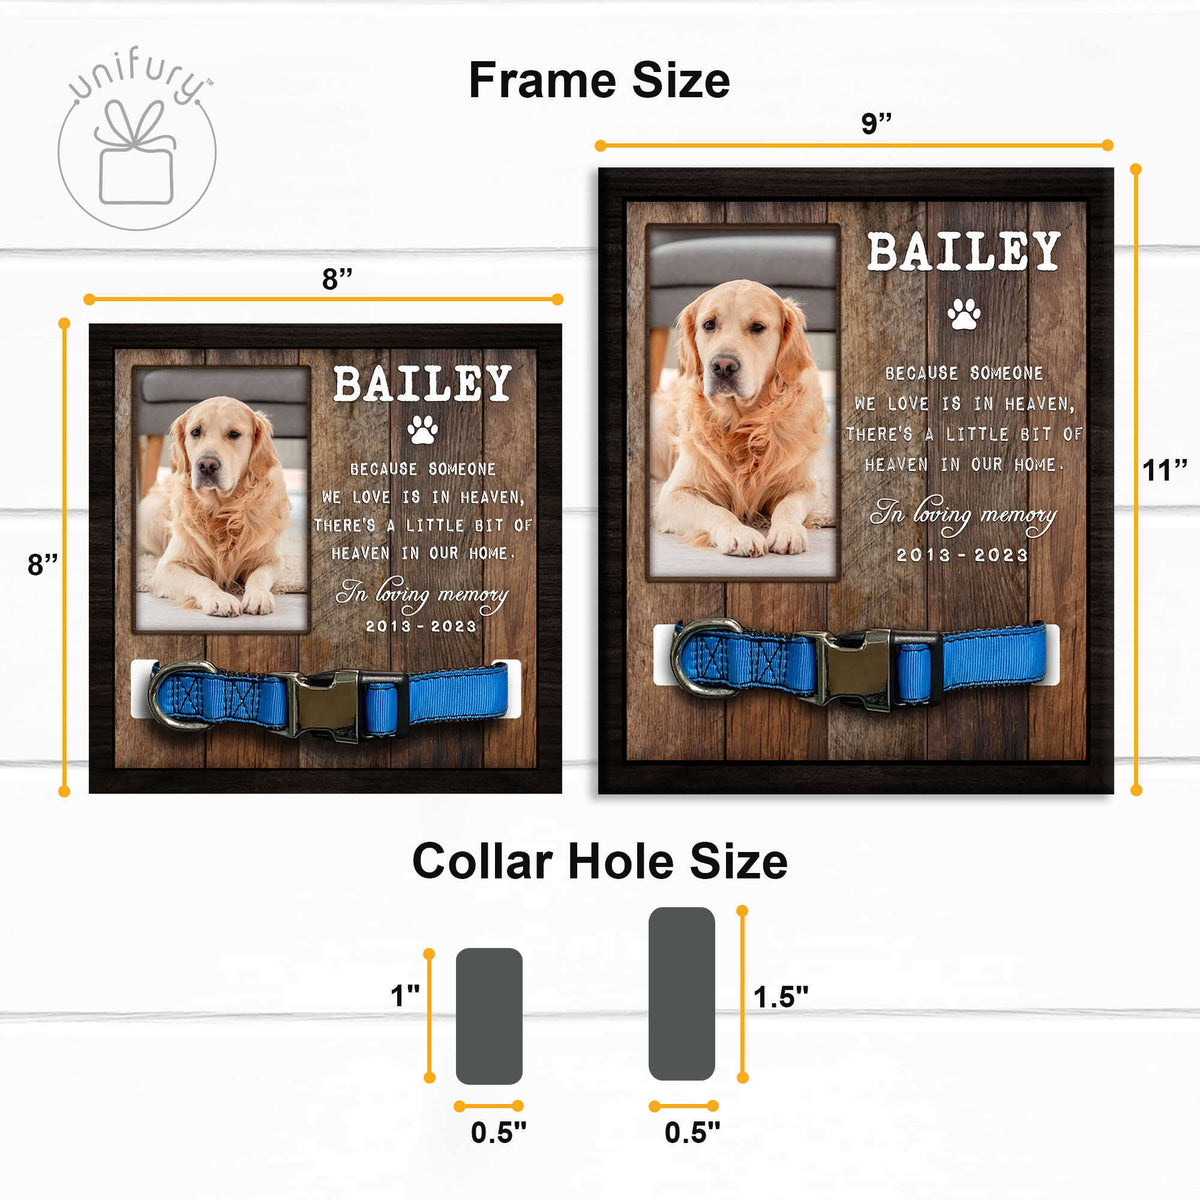 Because Someone We Love Is In Heaven Memorial Dog Cat Collar Frame